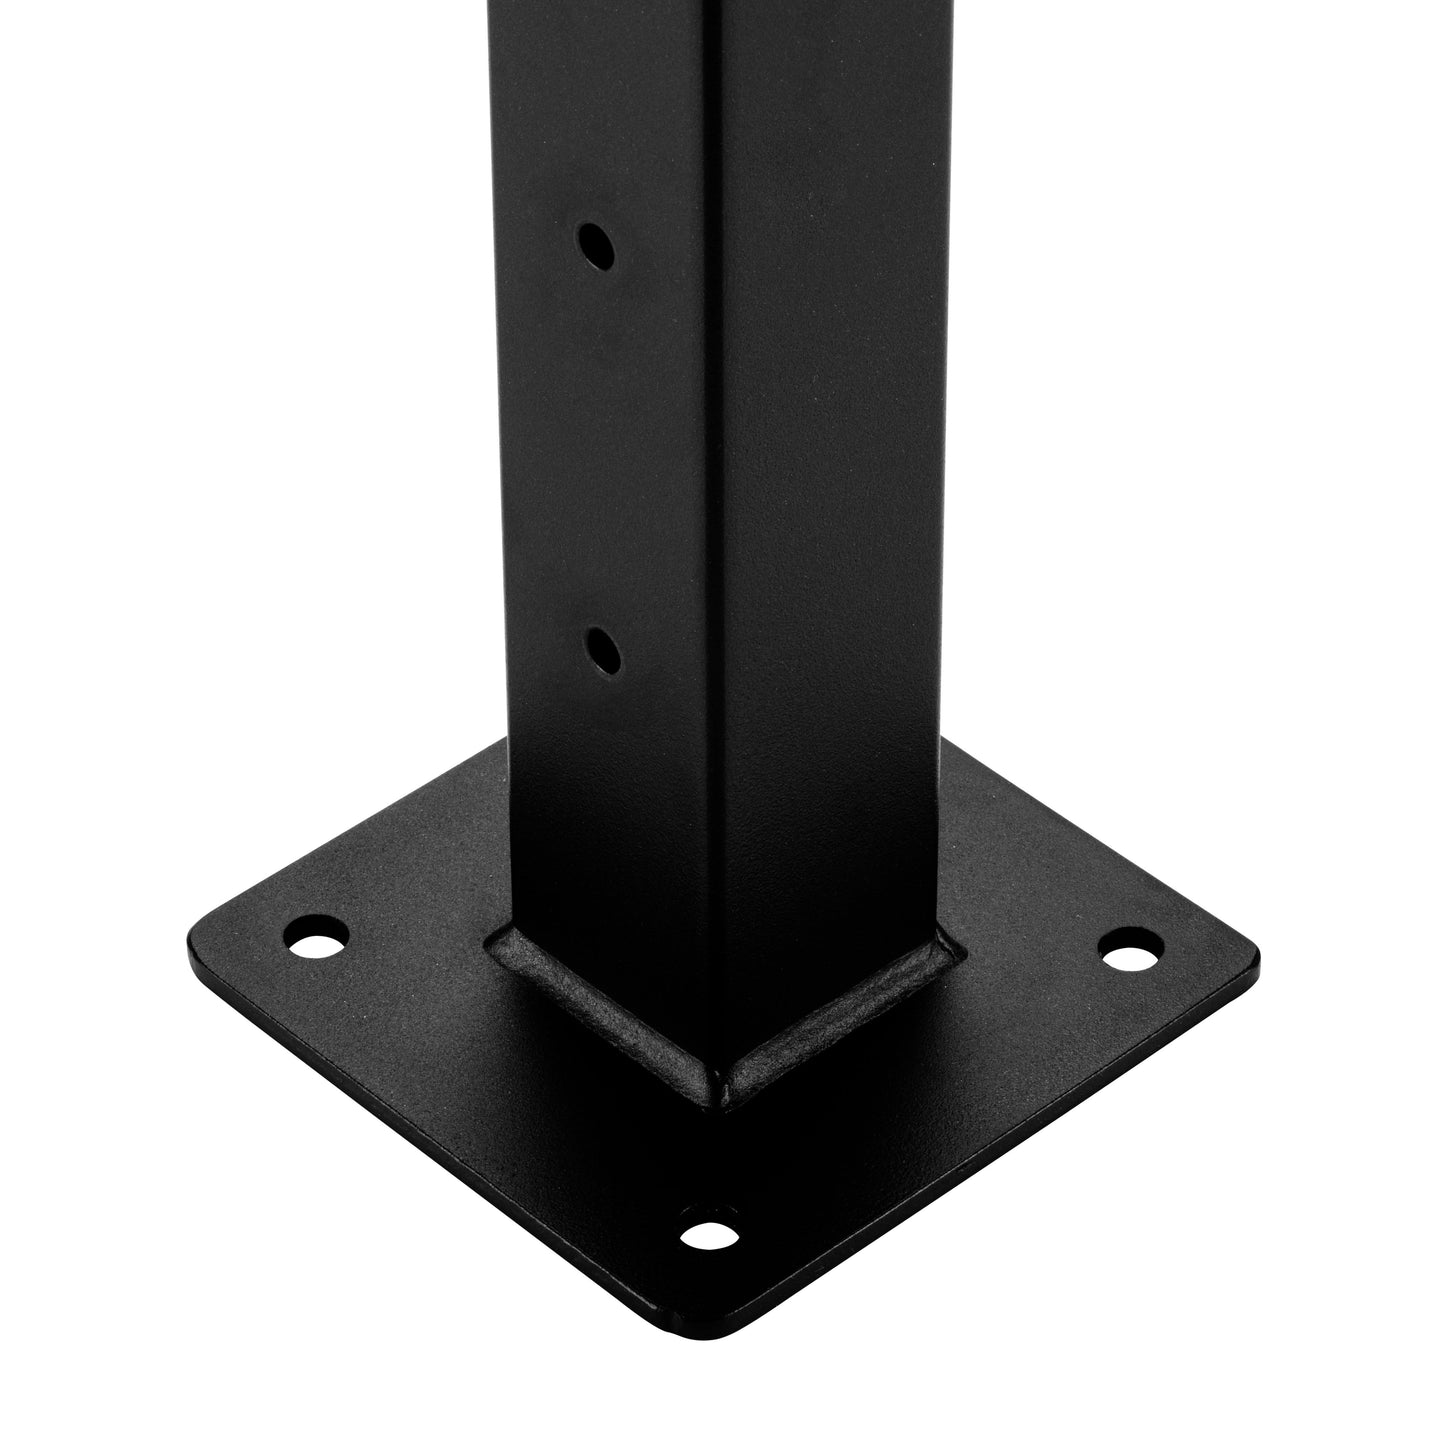 10 ft. Deck Cable Railing, 42 in. Base Mount, Black , Stainless